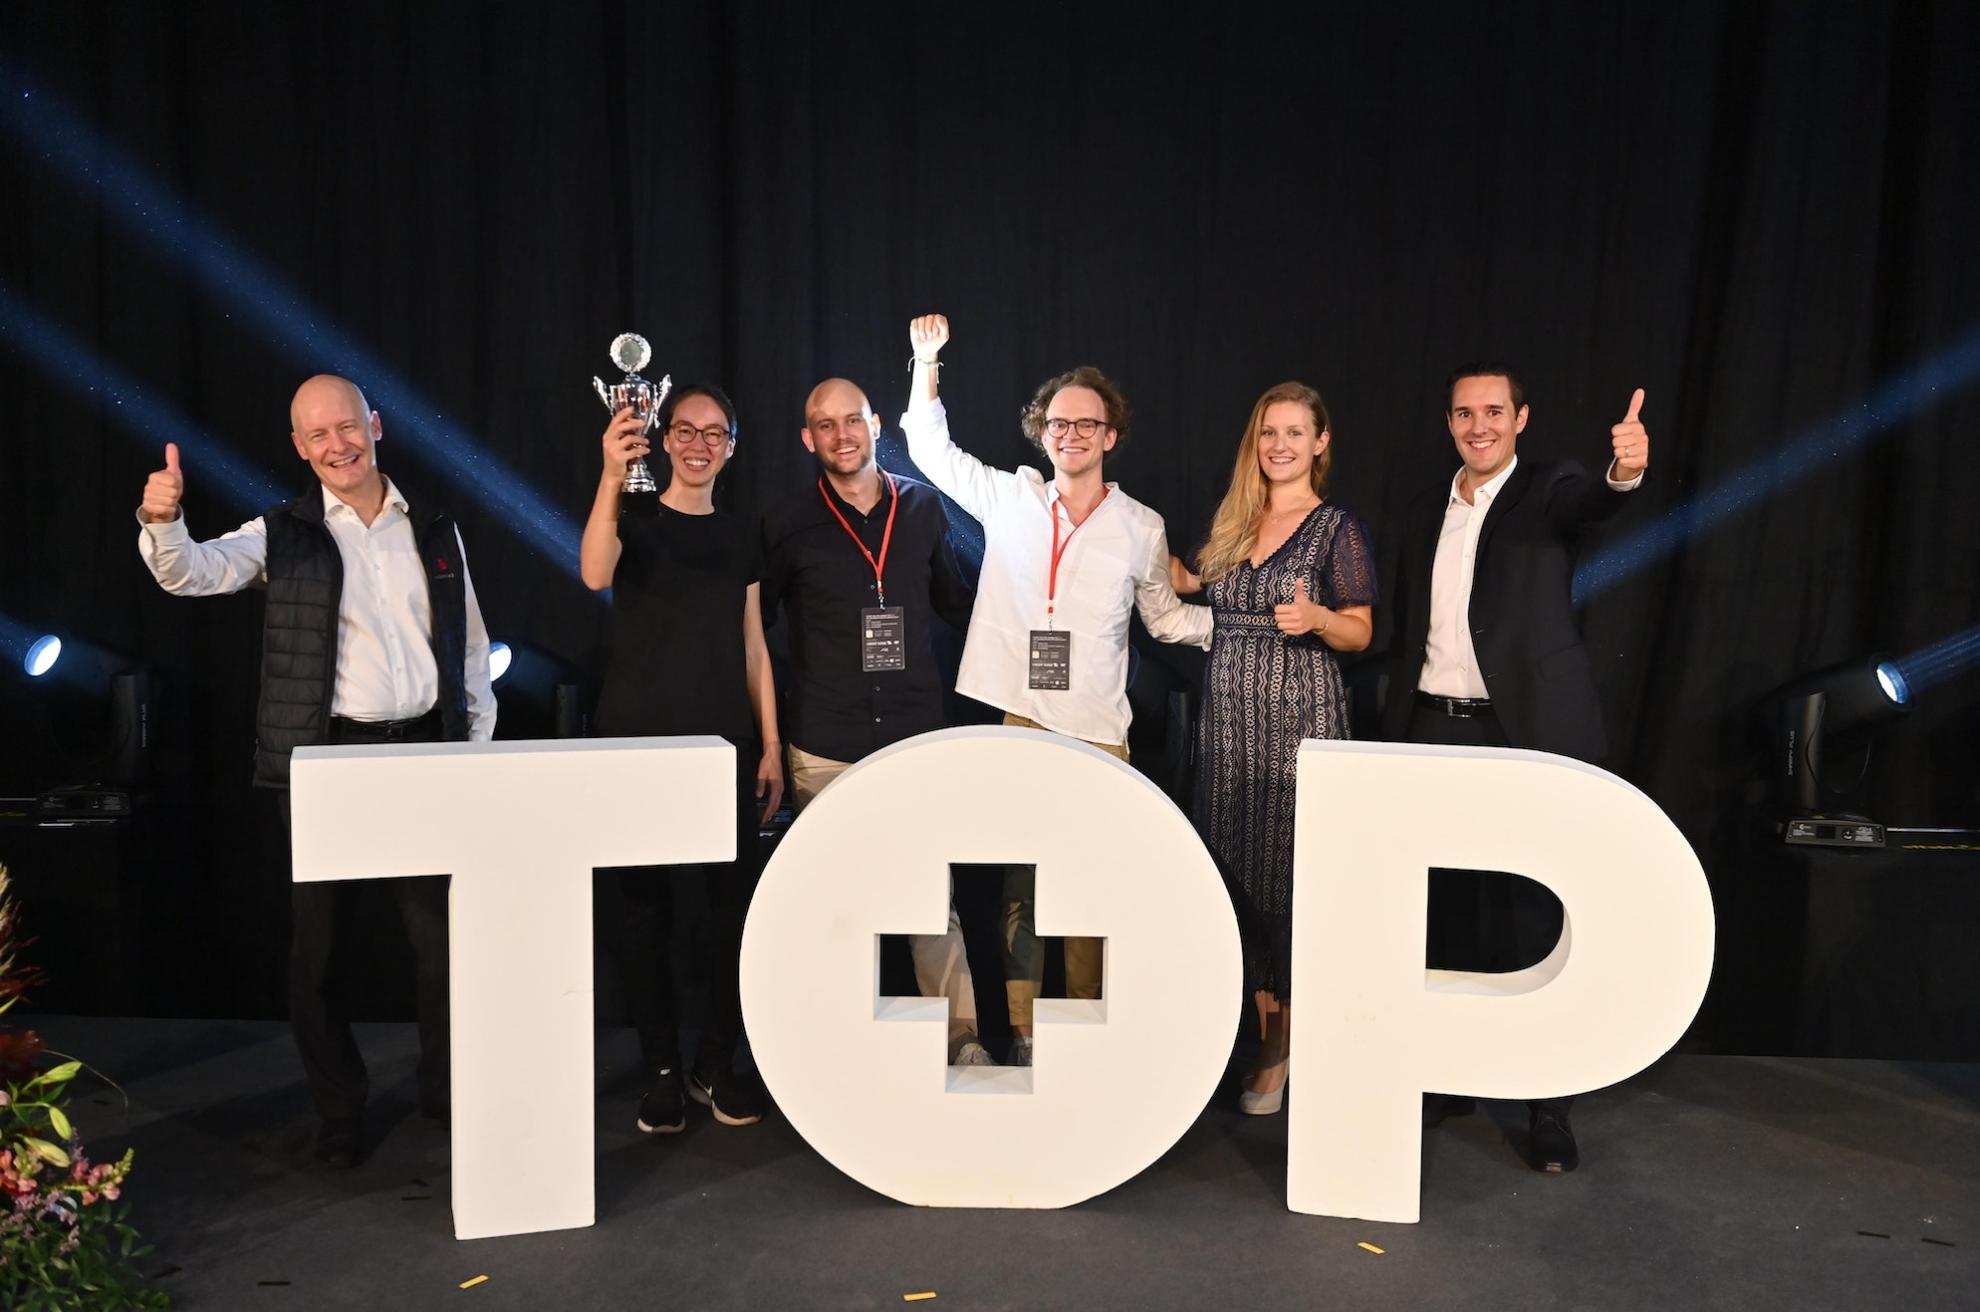 Celebrating the third place at the TOP 100 Swiss Startup Award 2022.